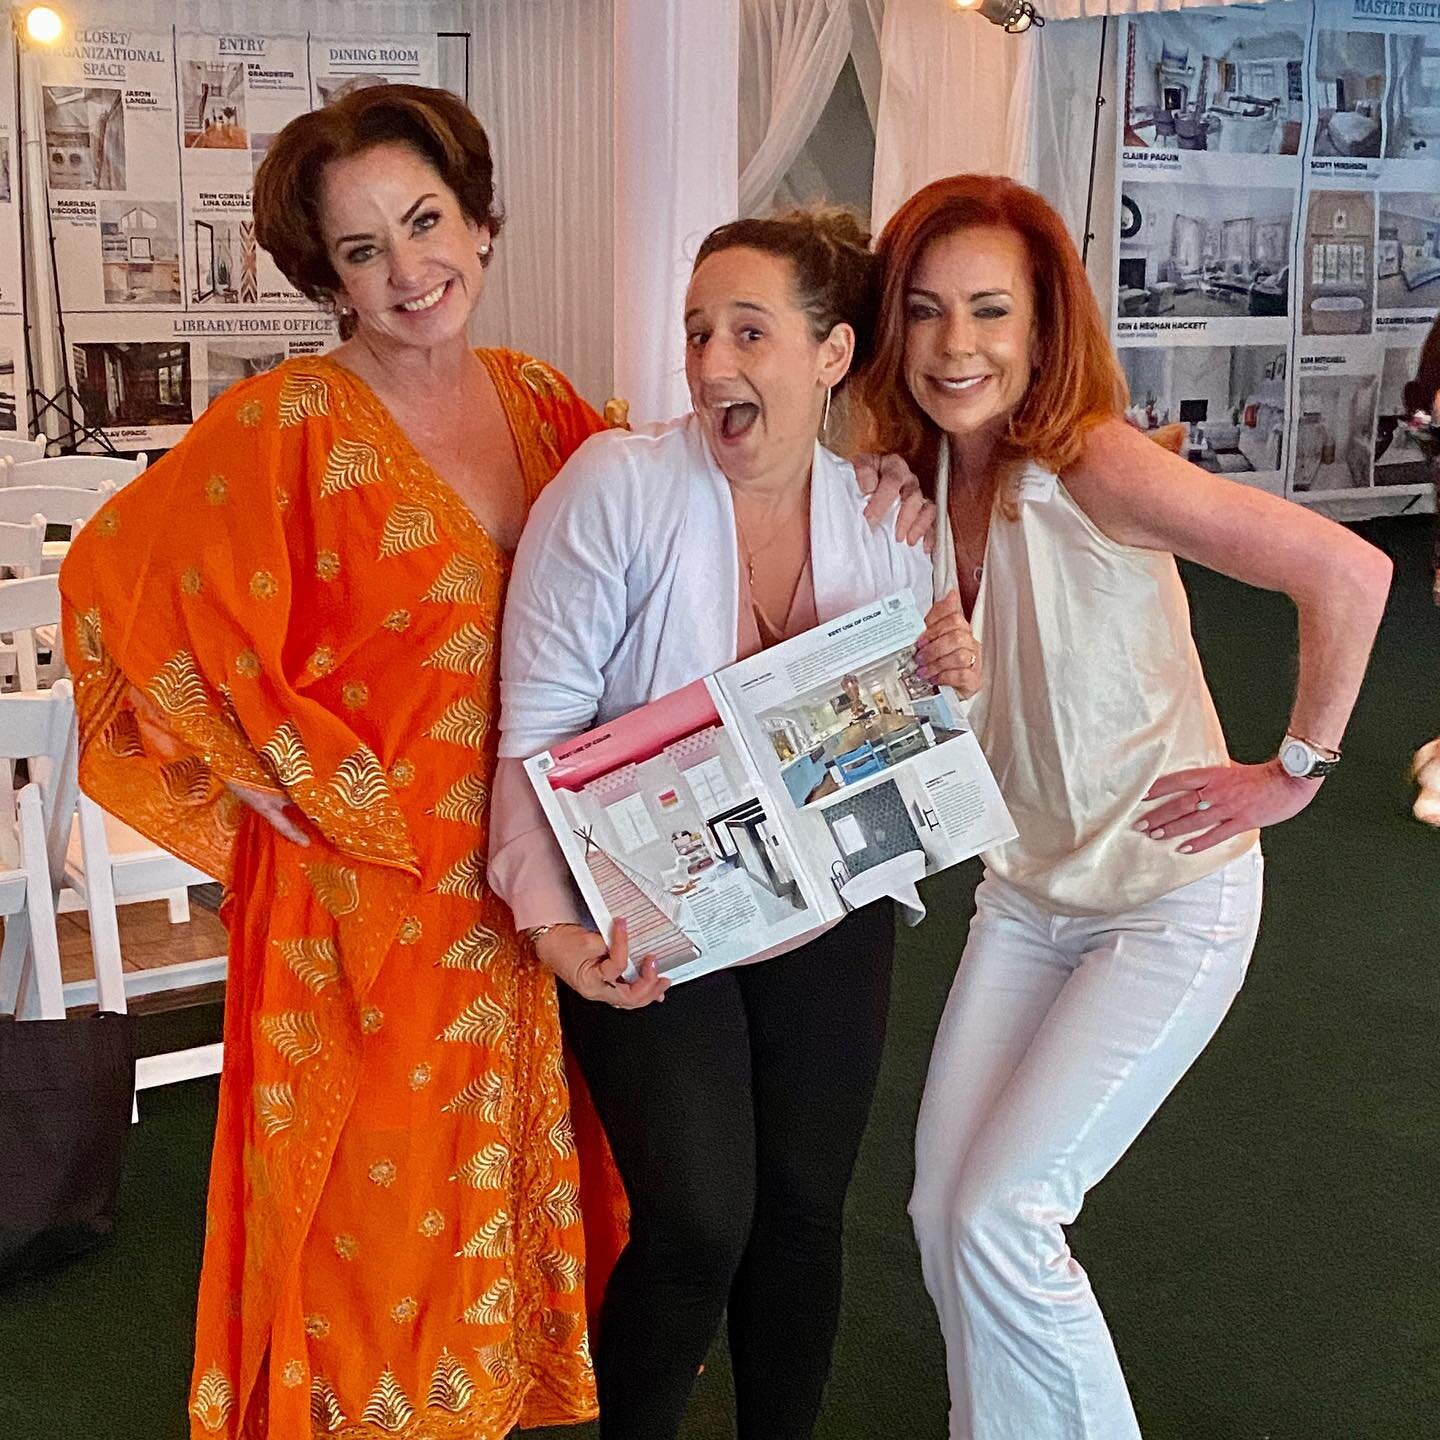 Congrats to @christinewetzeldesign for winning the &ldquo;Best Use of Color Award&rdquo; at the Westchester Home Magazine Awards this evening. We were proud to be finalists in the category too for our mid-century bath remodel! @westchesterhomemag #we